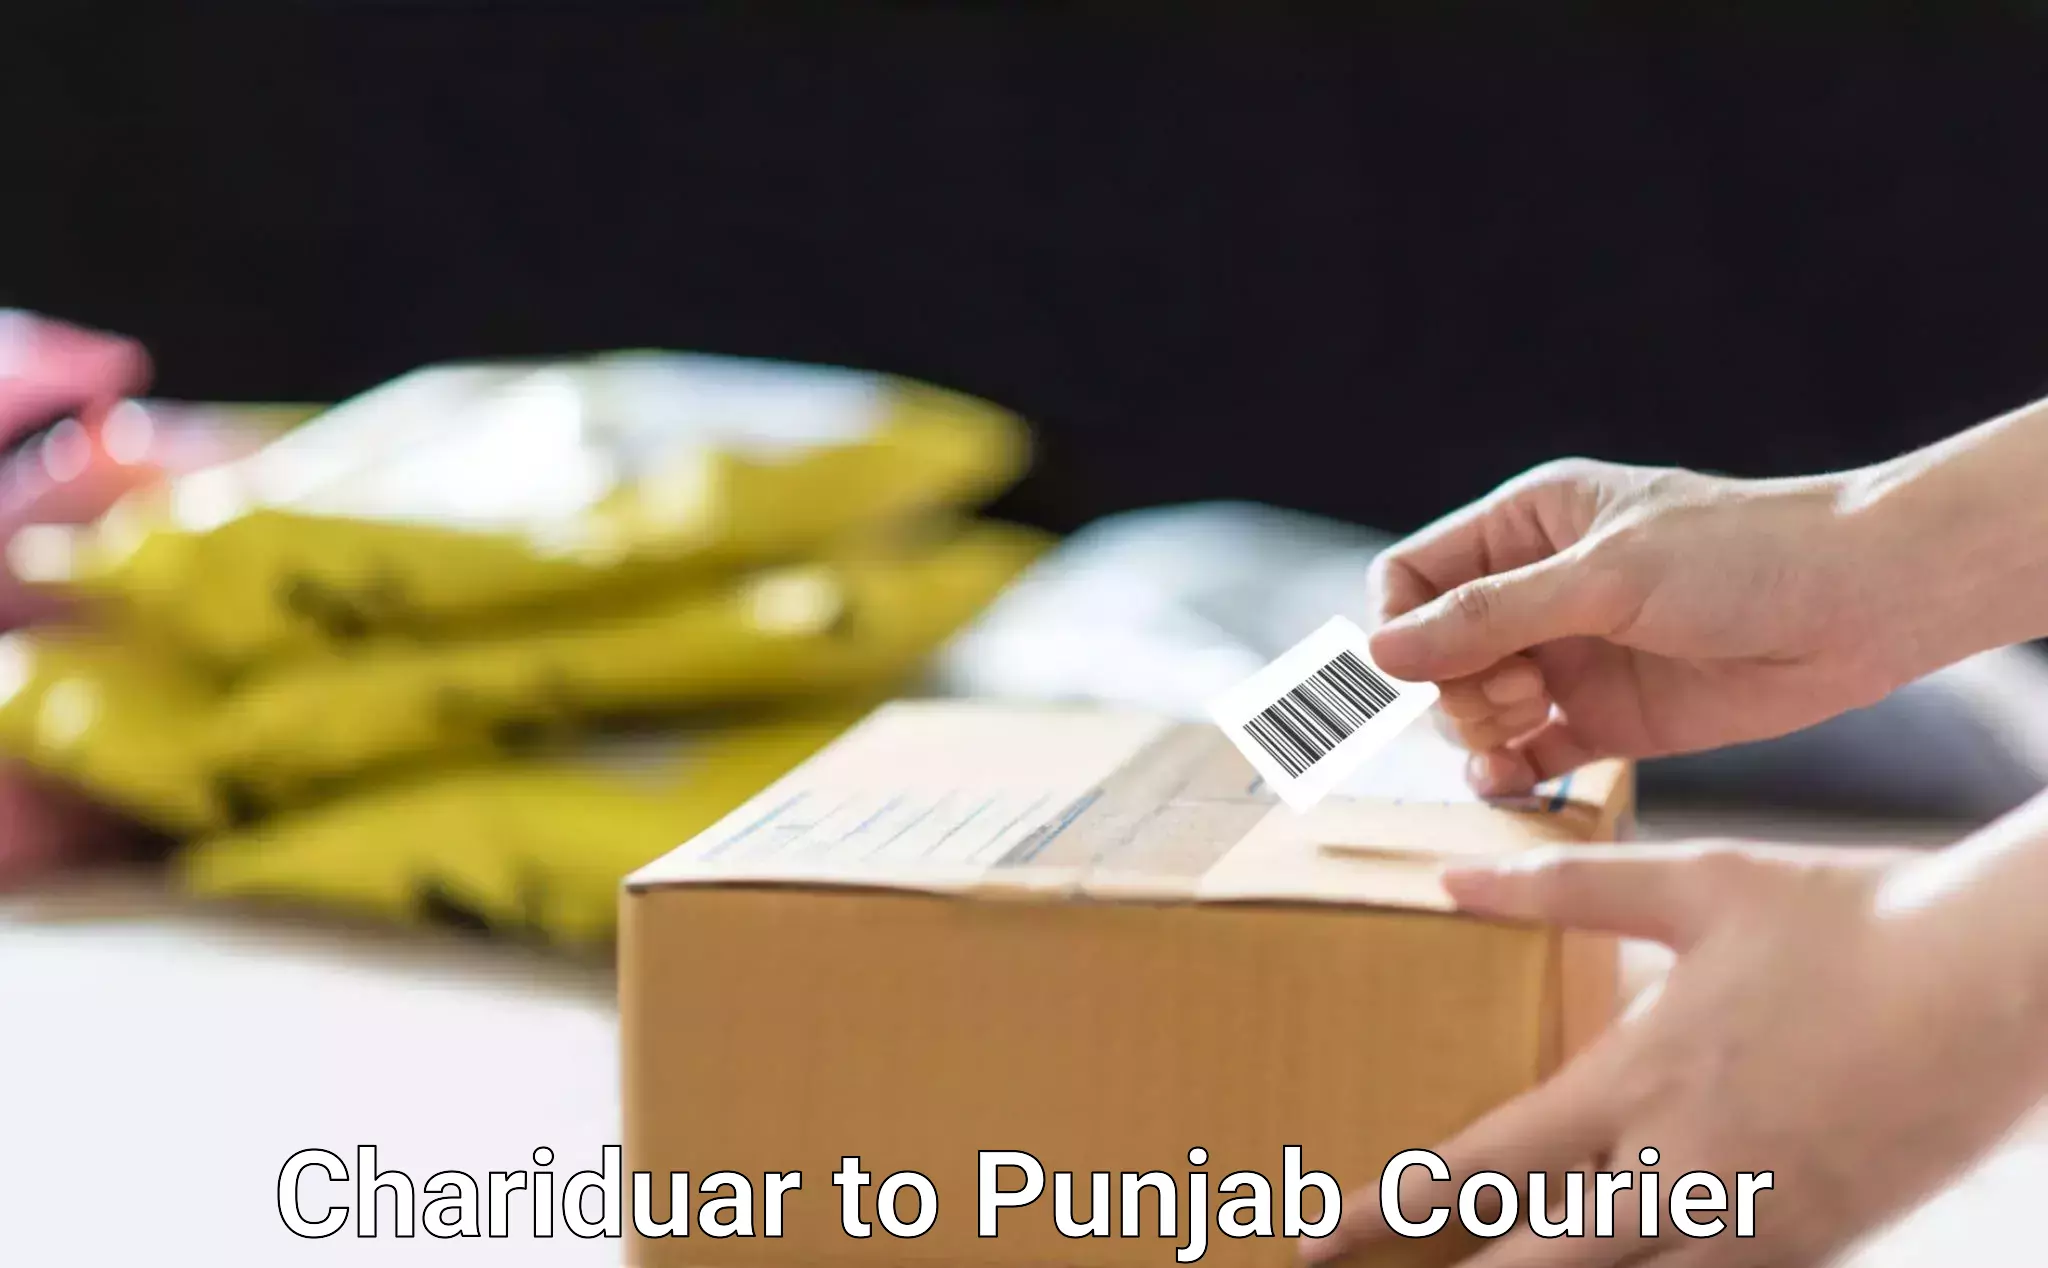 Sustainable courier practices Chariduar to Ajnala